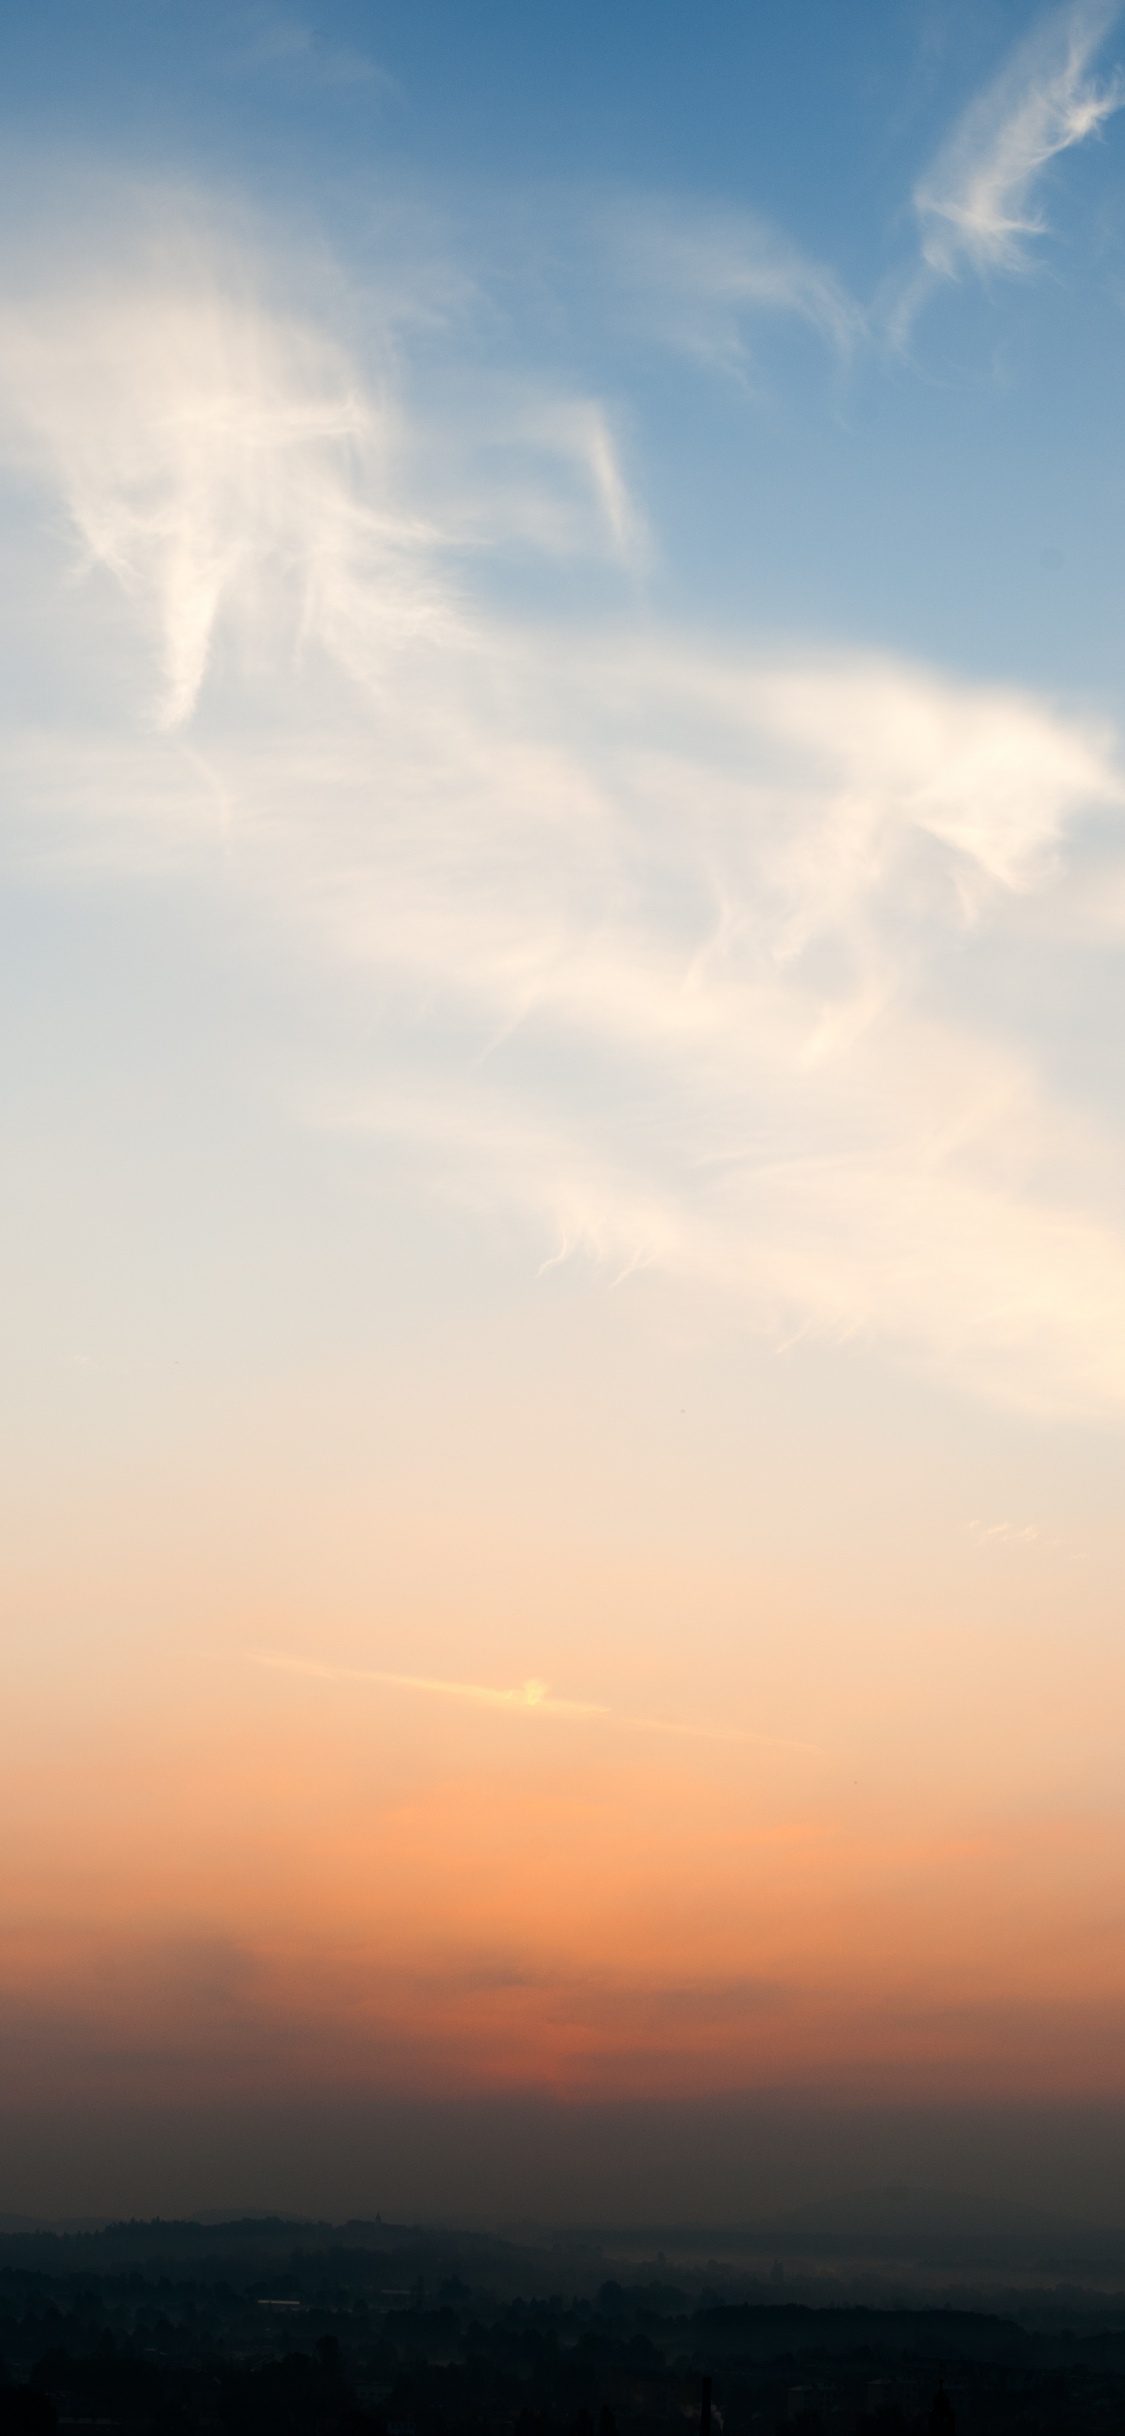 White Clouds and Blue Sky During Daytime. Wallpaper in 1125x2436 Resolution